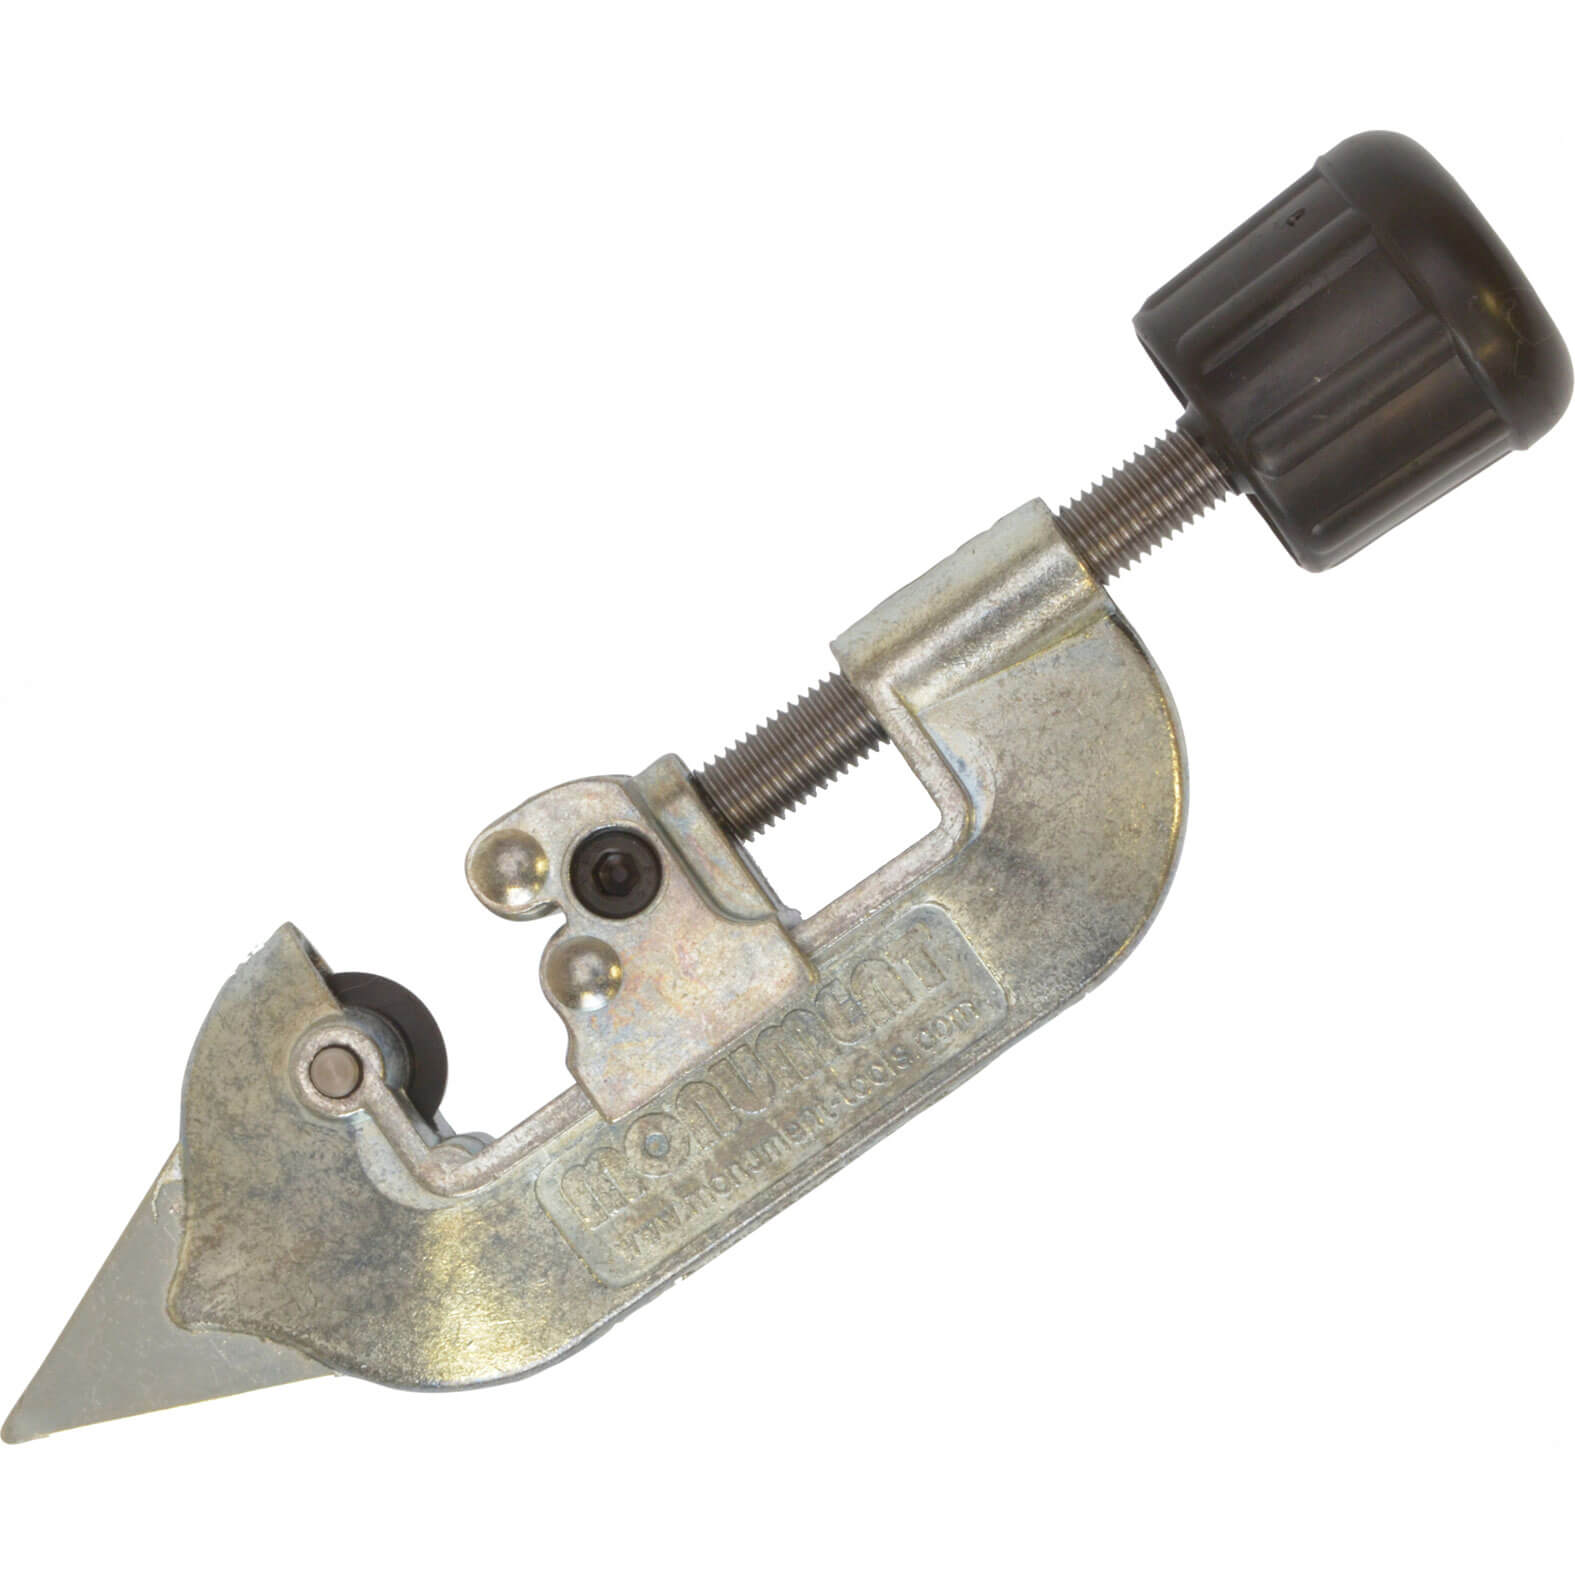 Monument 265B Pipe Cutter No 1